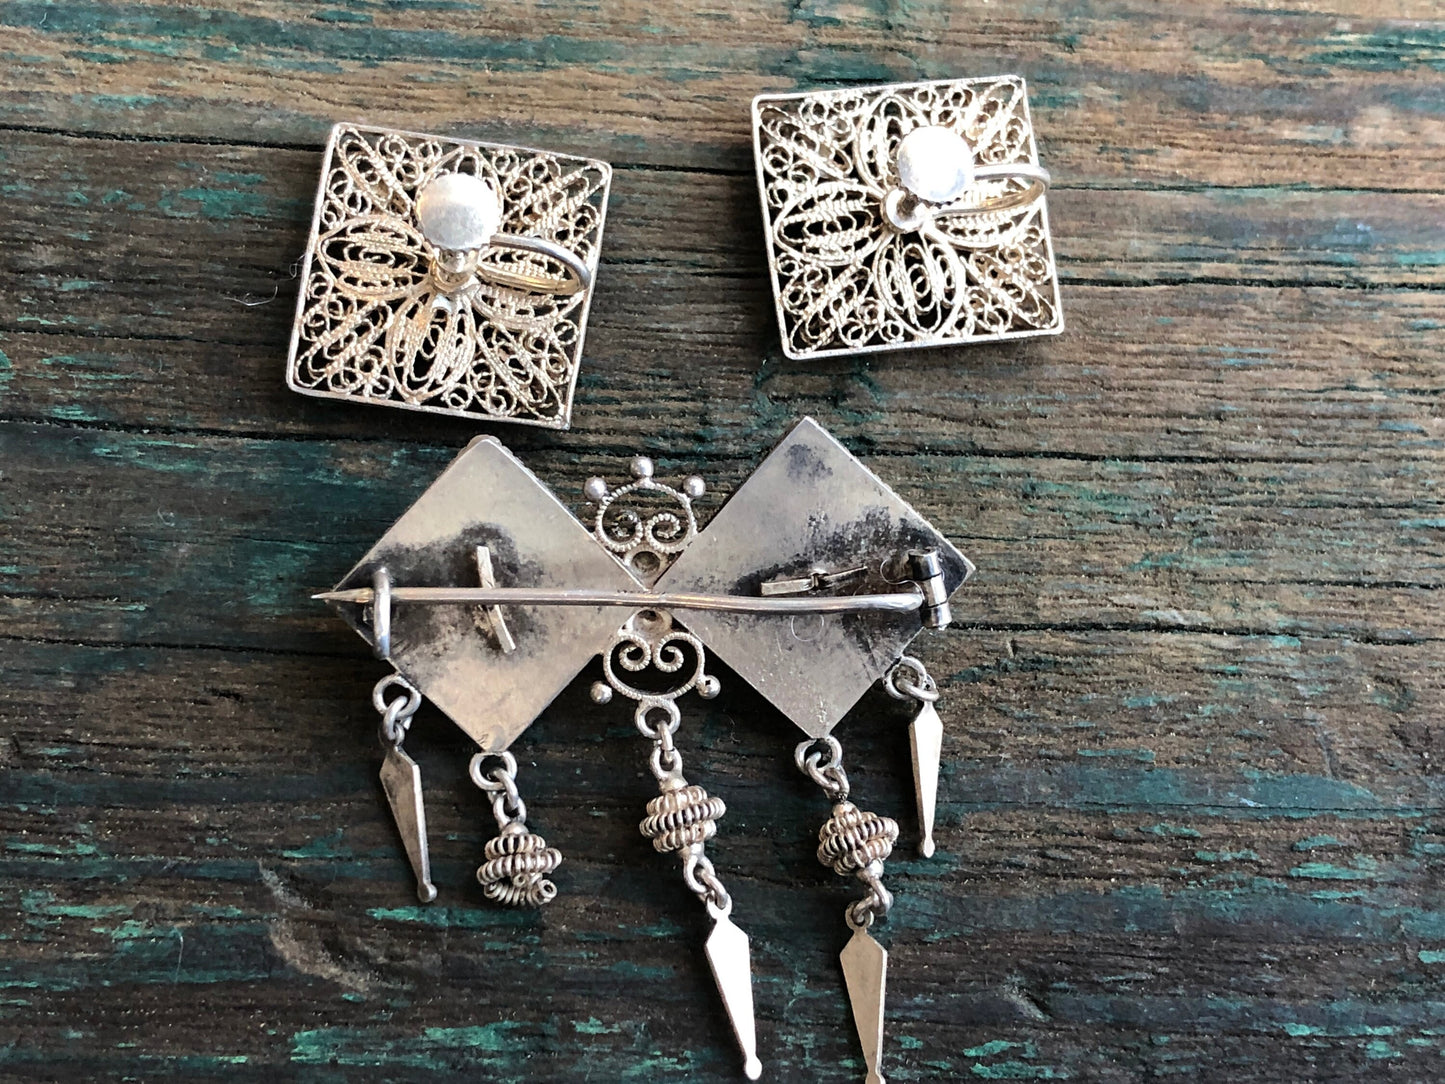 Antique Victorian Sterling Silver Filigree Screw back Earrings and Brooch Set